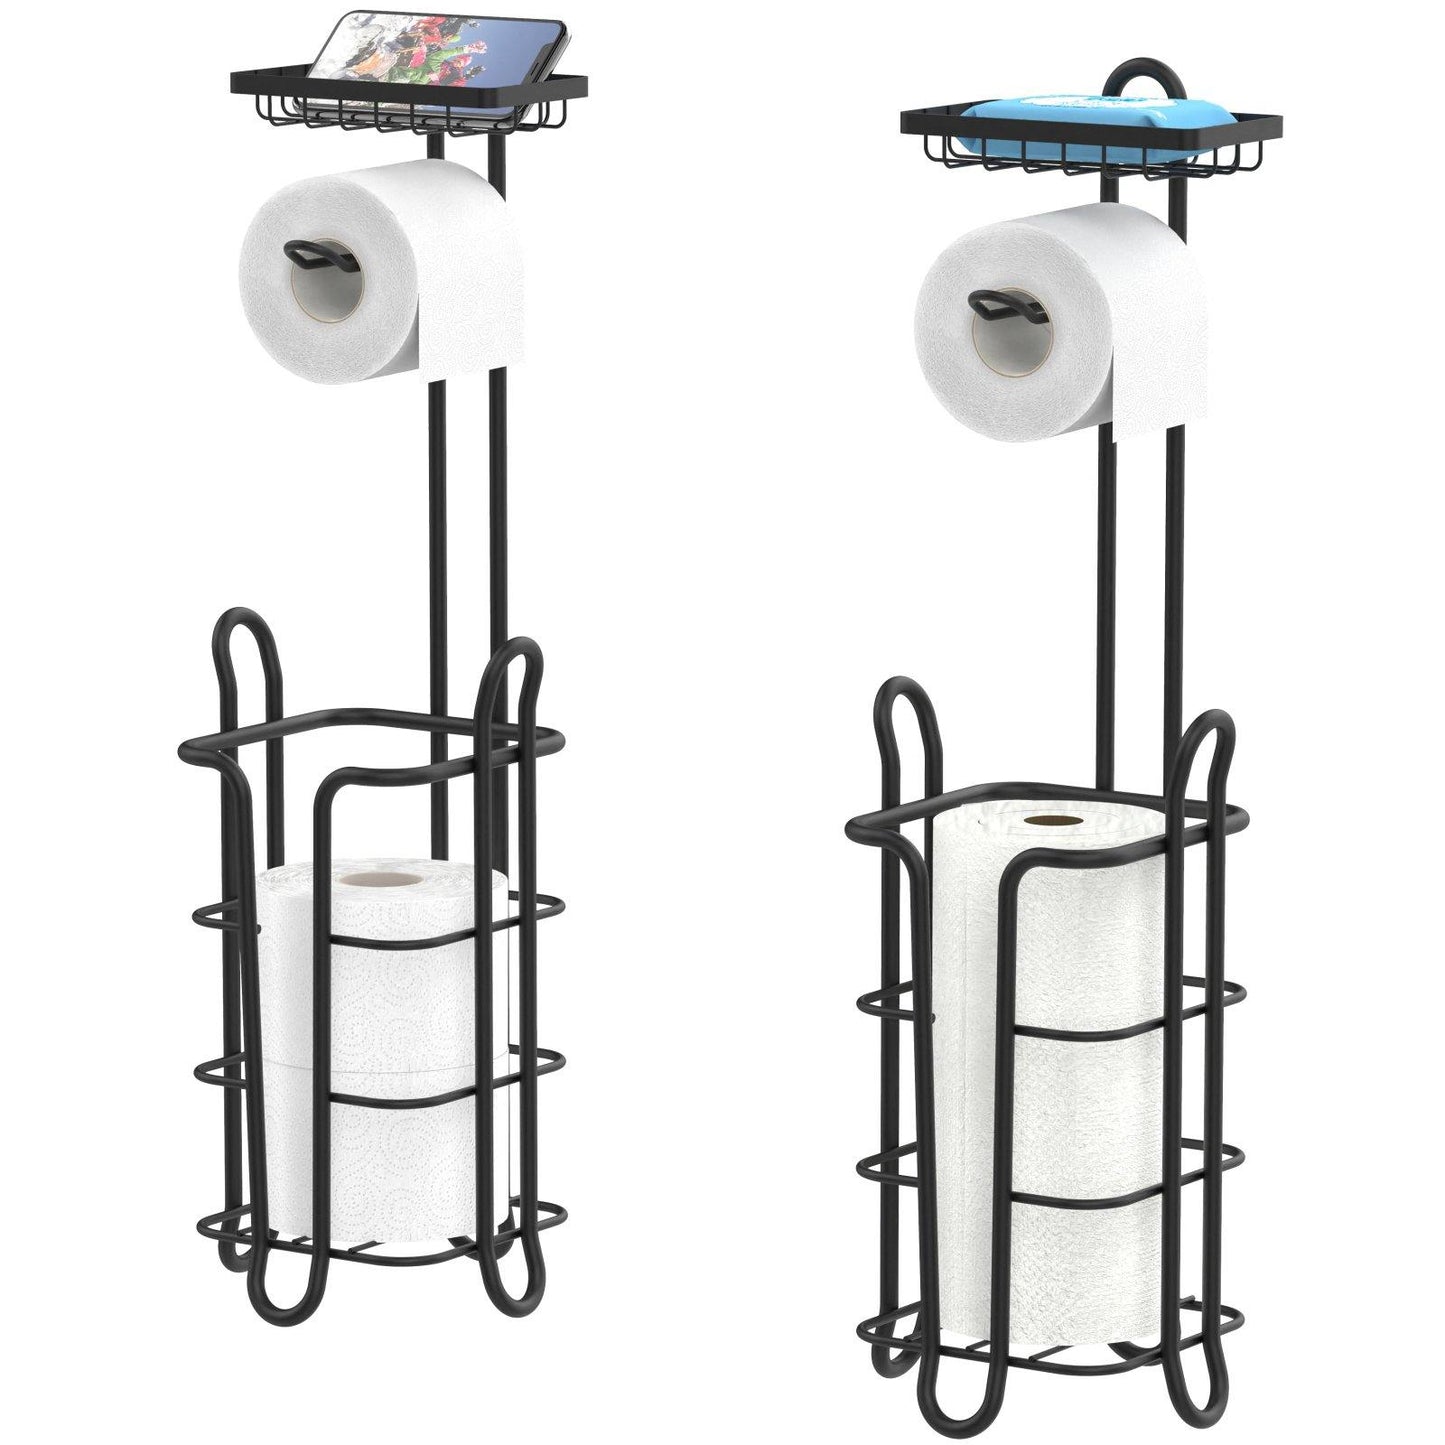 2 Pack Free Standing Toilet Paper Holder Stand, Toilet Tissue Paper Roll  Storage Holder with Shelf and Reserve for Bathroom Storage Holds Wipe,  Mobile